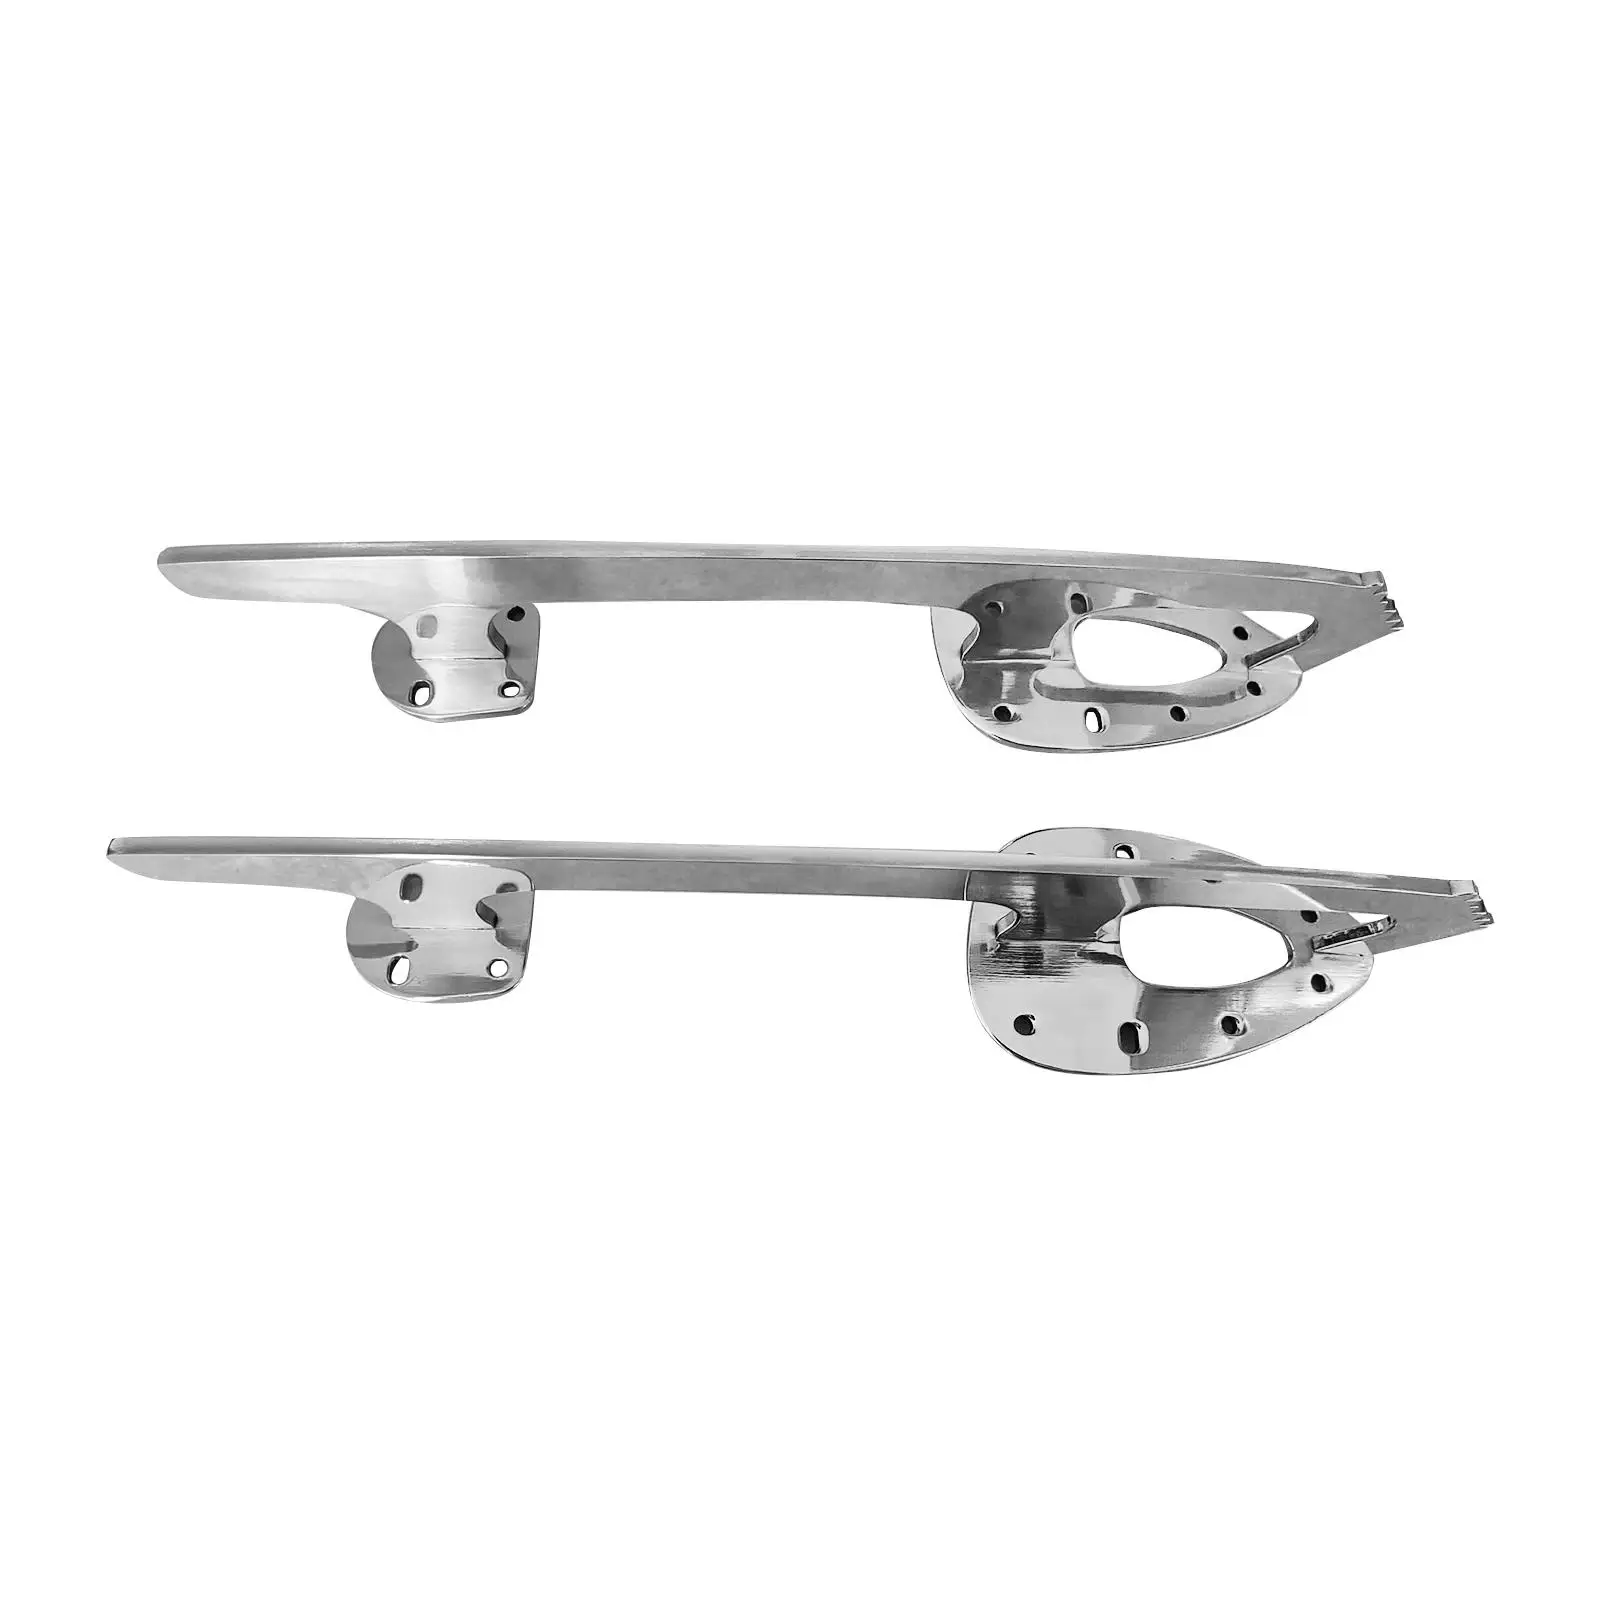 2 Pieces Ice Blades Replacement Accessory Thicken Bracket Stainless 291 mm Household Skating Shoe Blades for Skating Repairing